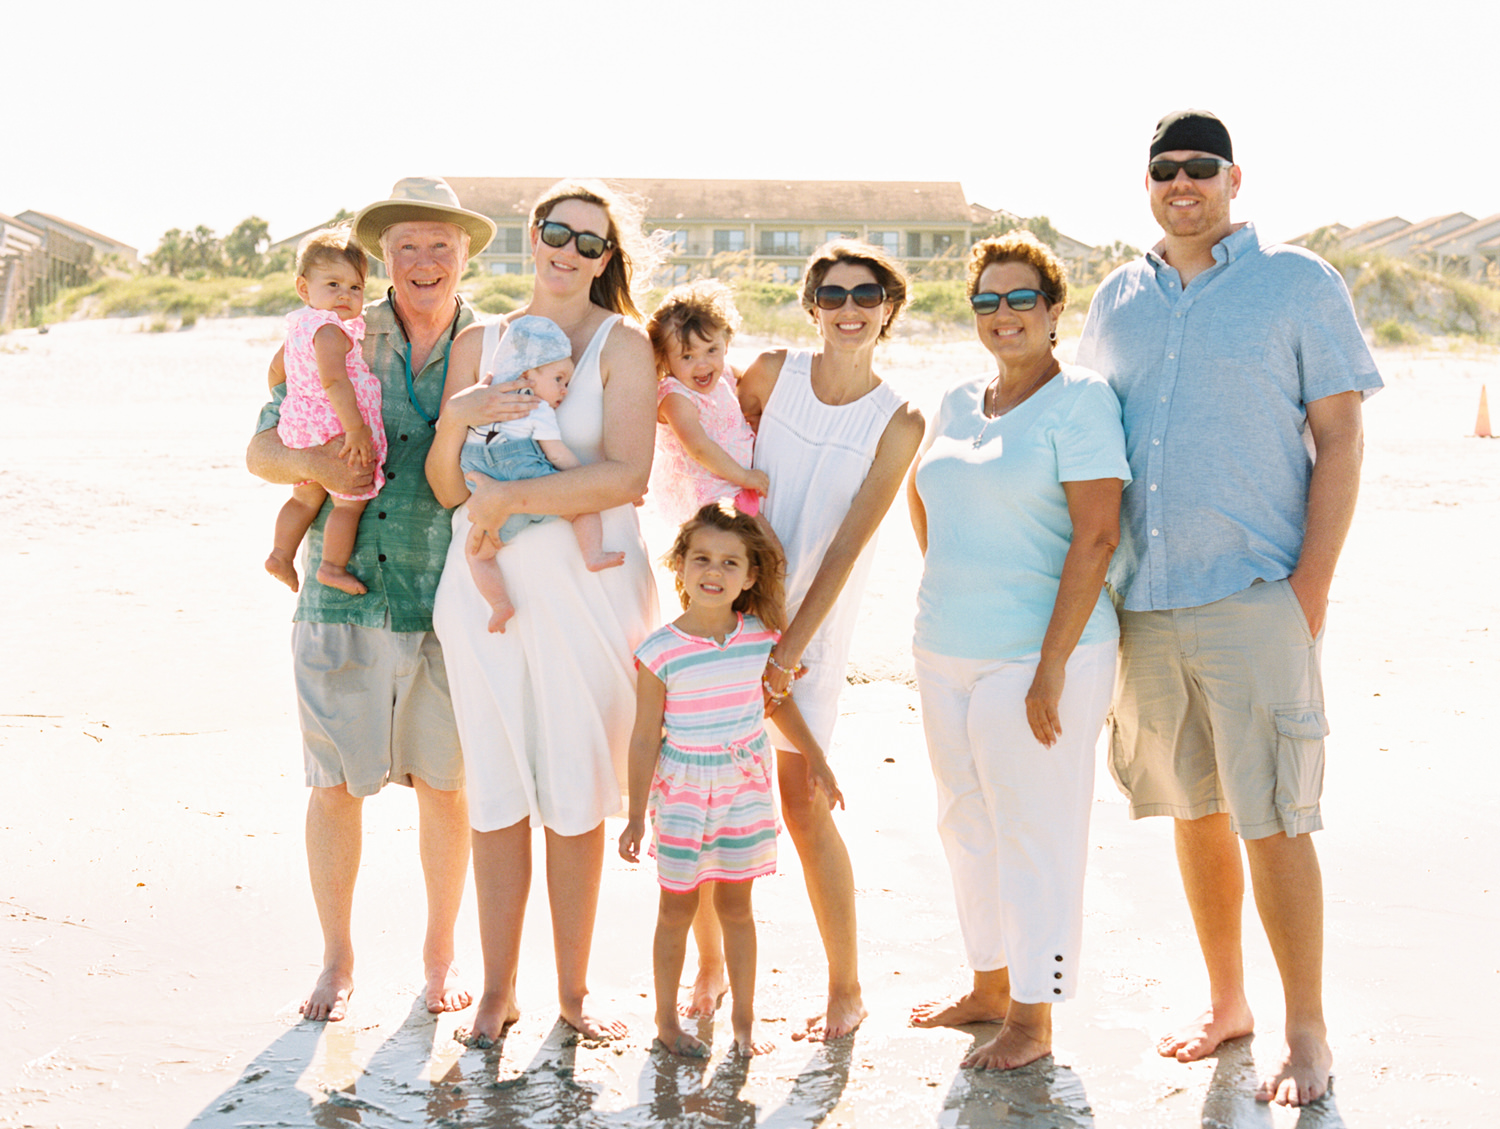 large extended family photo on a bright sunny beach